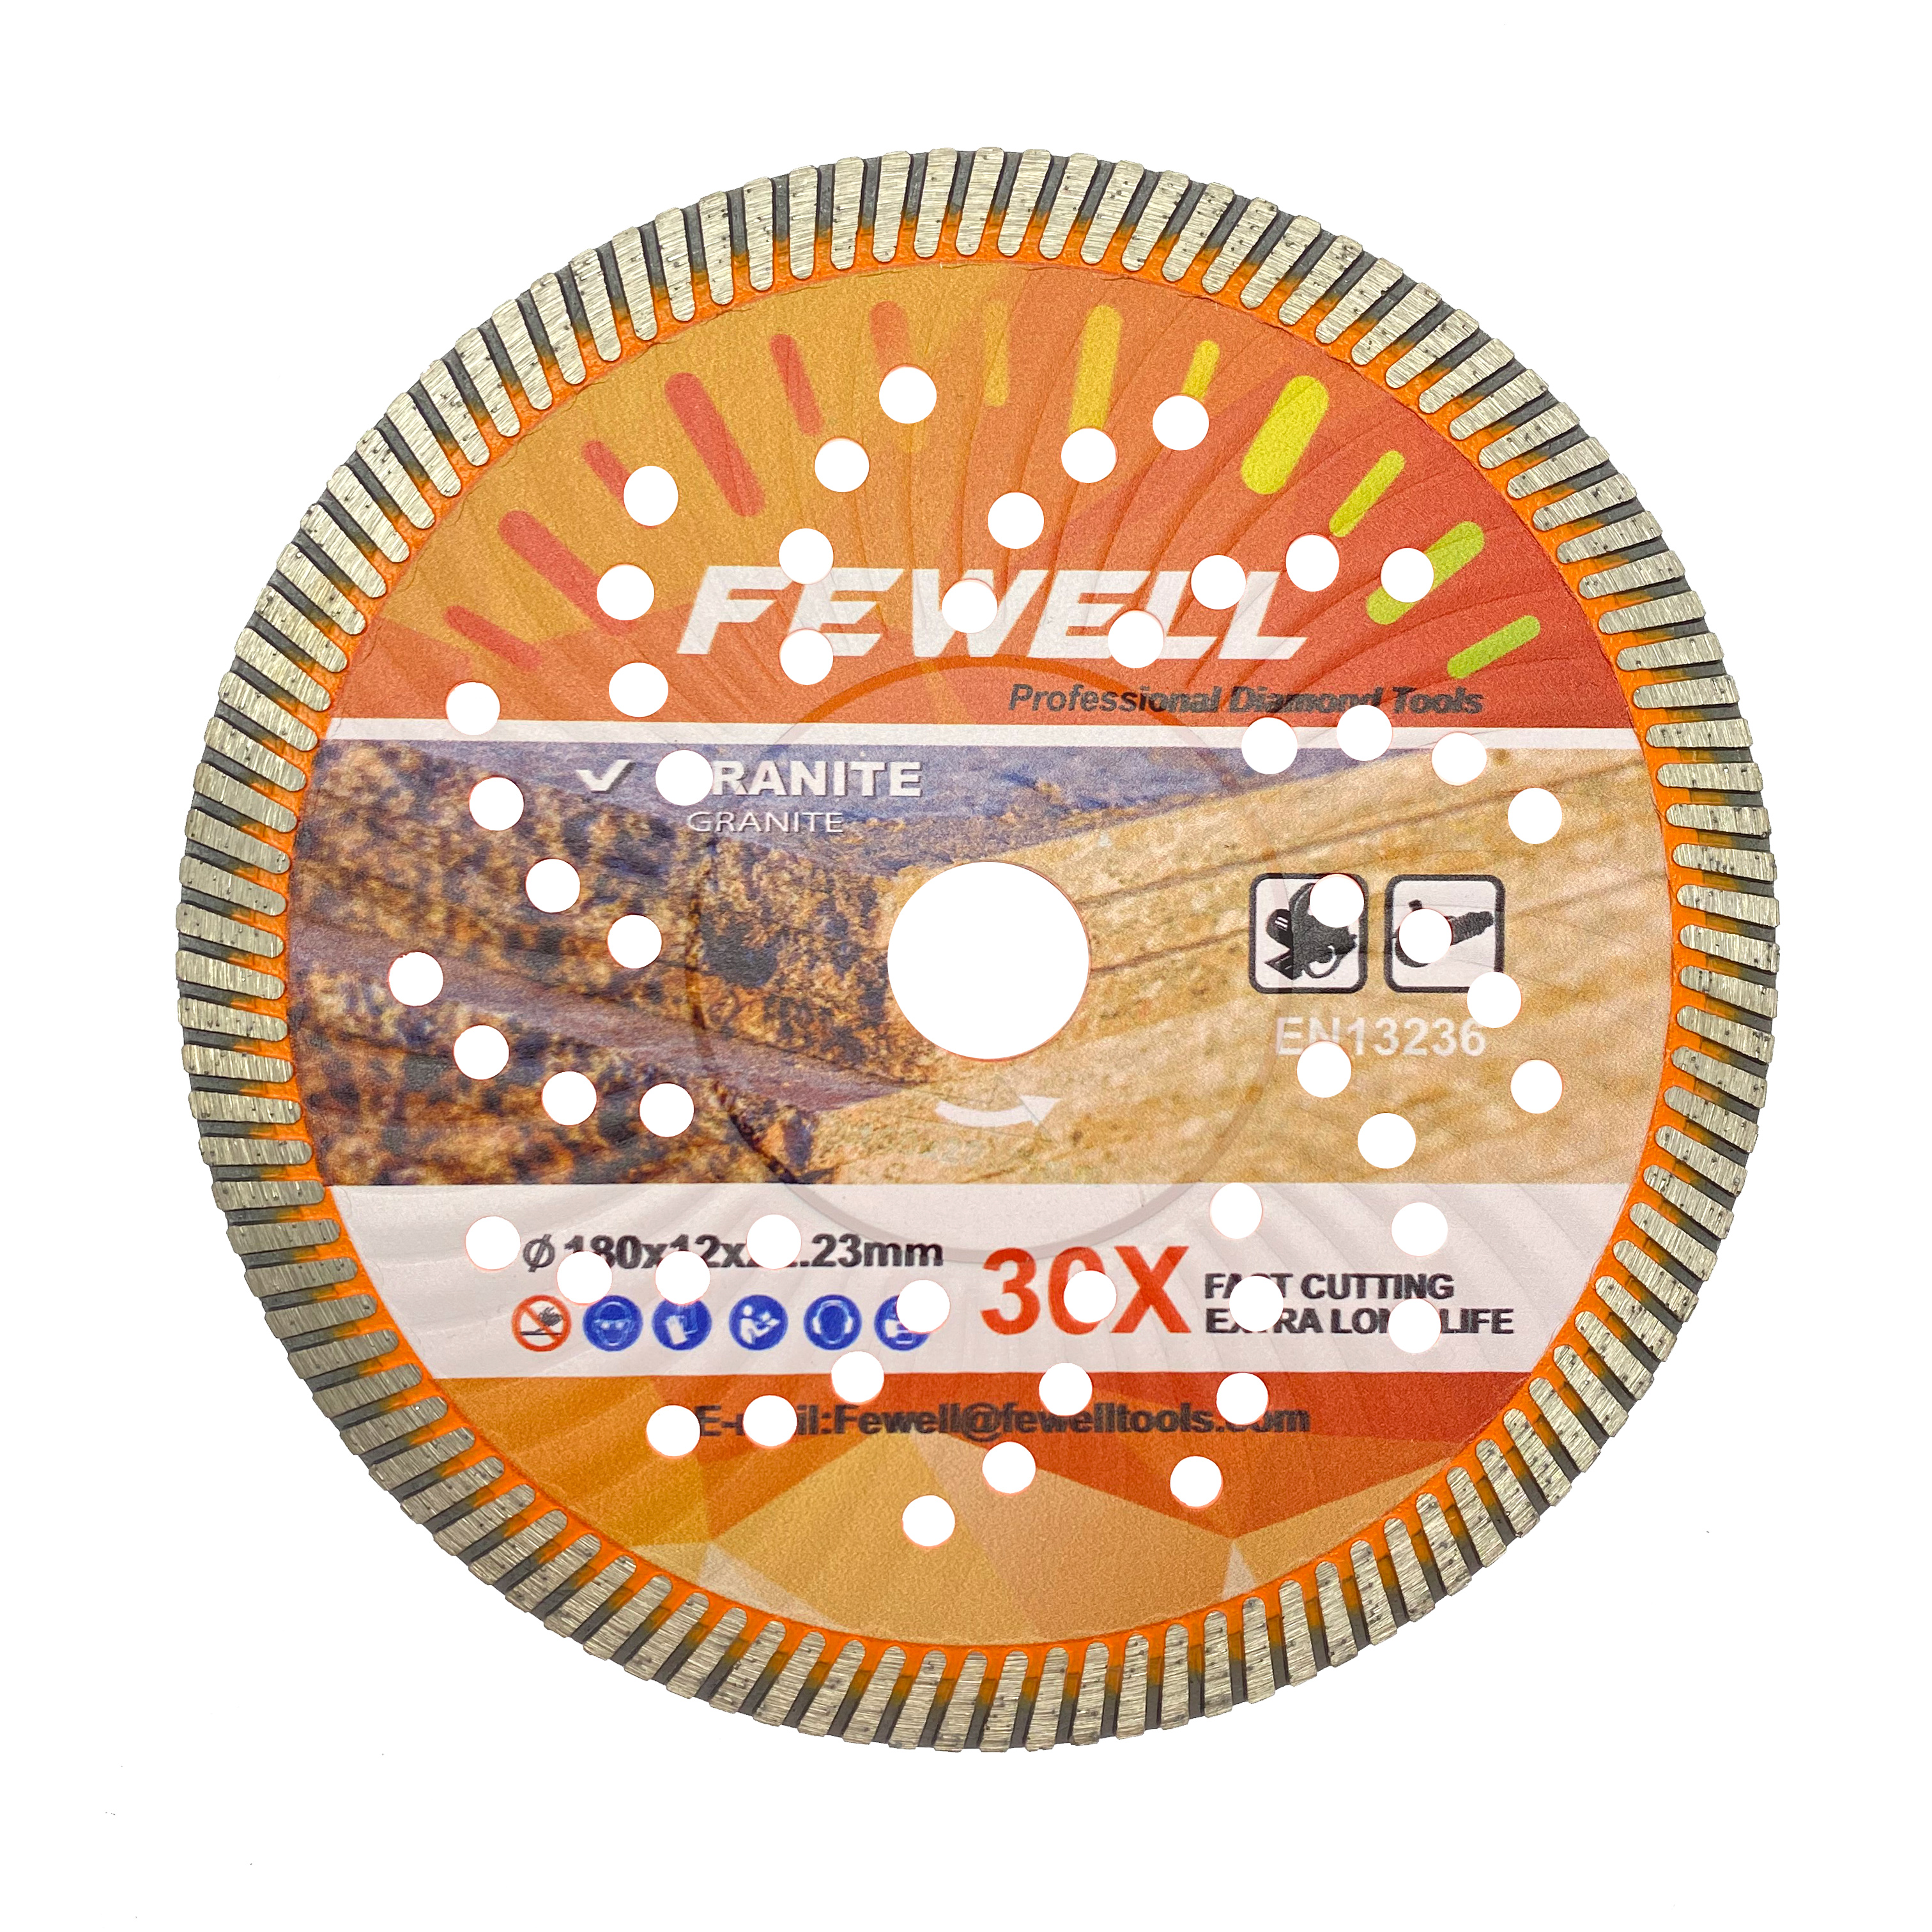 High quality 7inch 180*3.0*12*22.23mm Hot Press diamond turb wave saw blade with Reinforced Center for cutting granite 